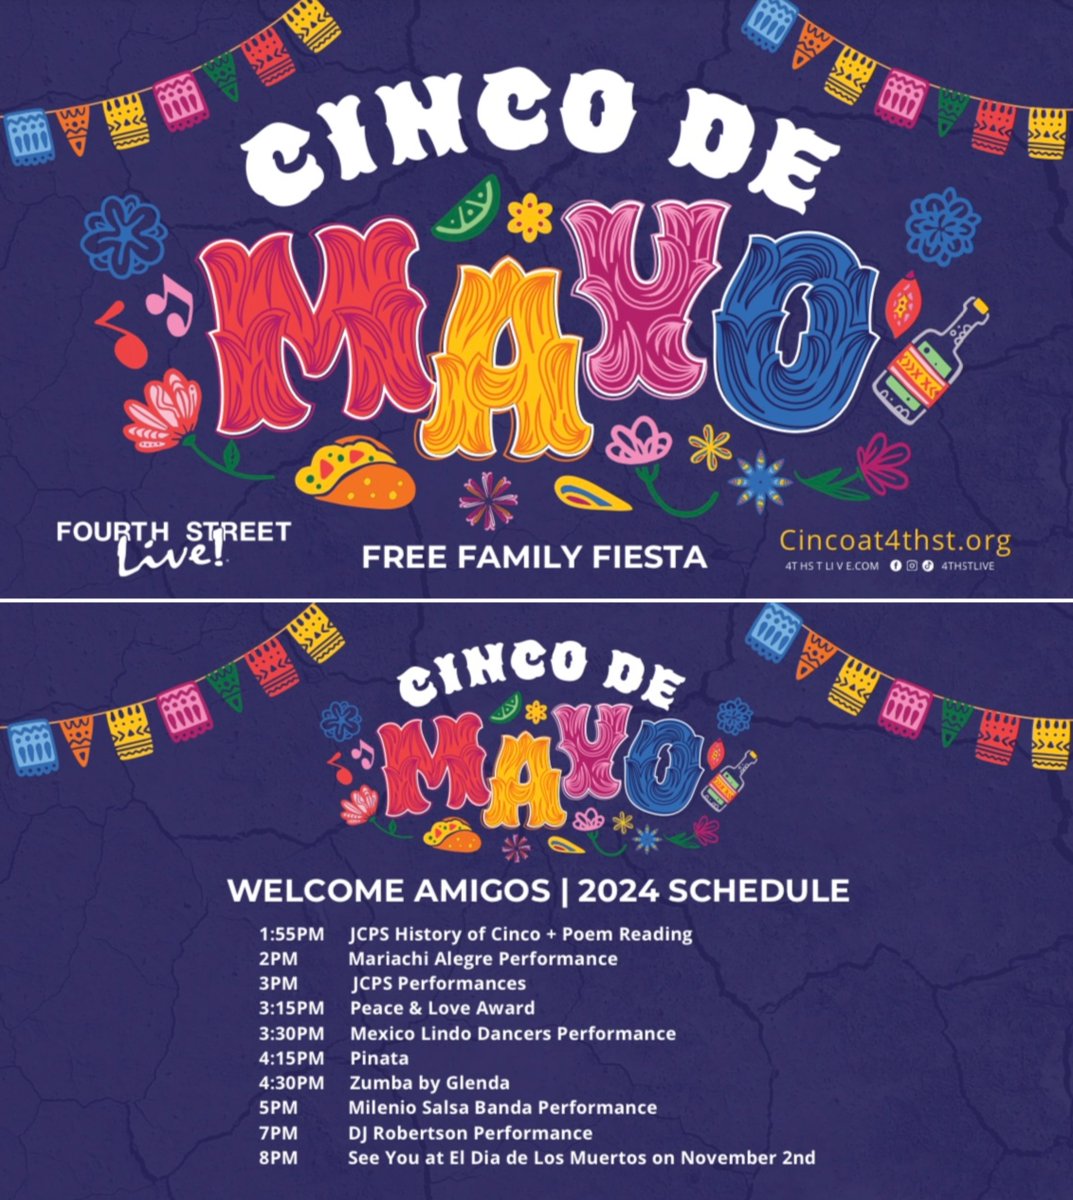 🎉 CINCO DE MAYO | Celebrate Cinco de Mayo on May 5 at @4thstlive with music, food, activities, dancing, & more! This event is free. Stop by JCPS' booths and catch students from our Latin American and Hispanic Student Organization (LAHSO) performing on the main stage! #WeAreJCPS